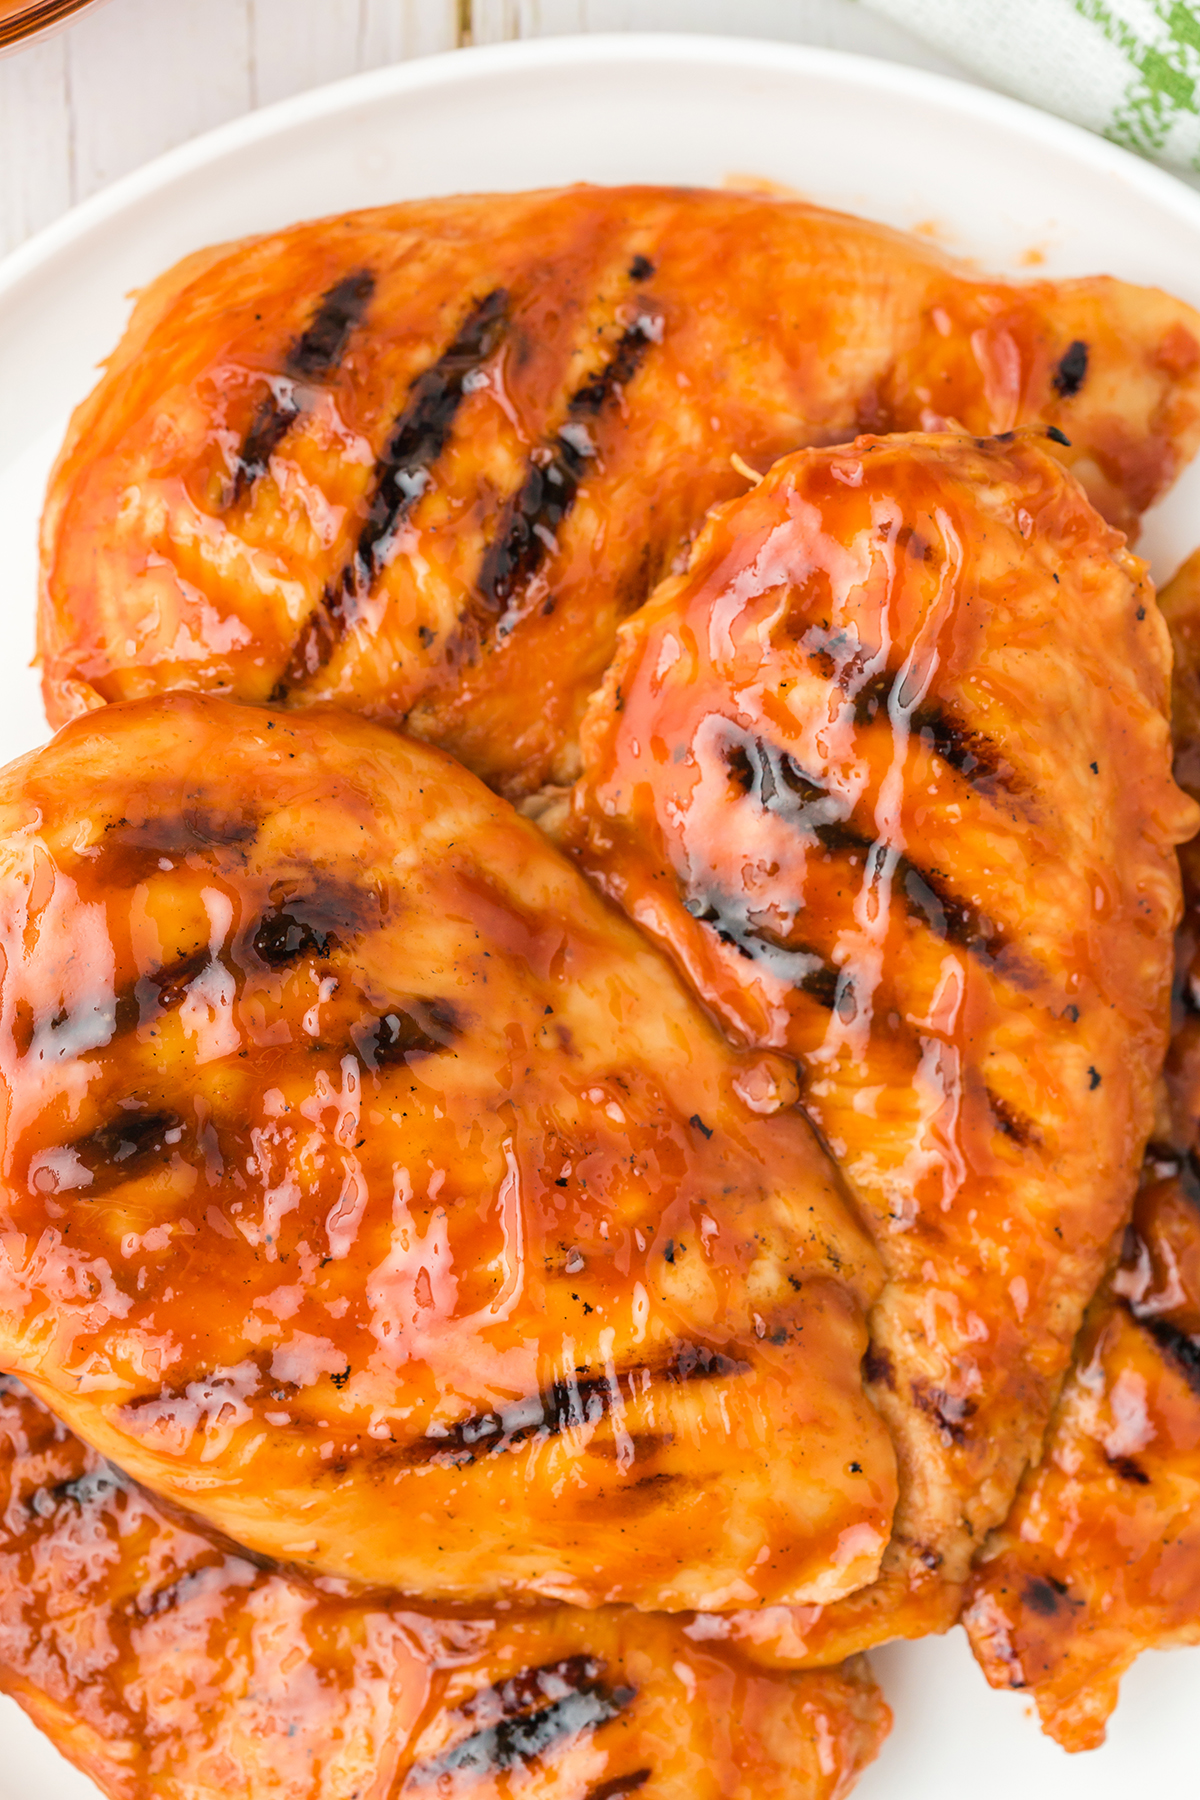 over the top close-up of grilled chicken with gorgeous shiny bbq sauce slathered on top